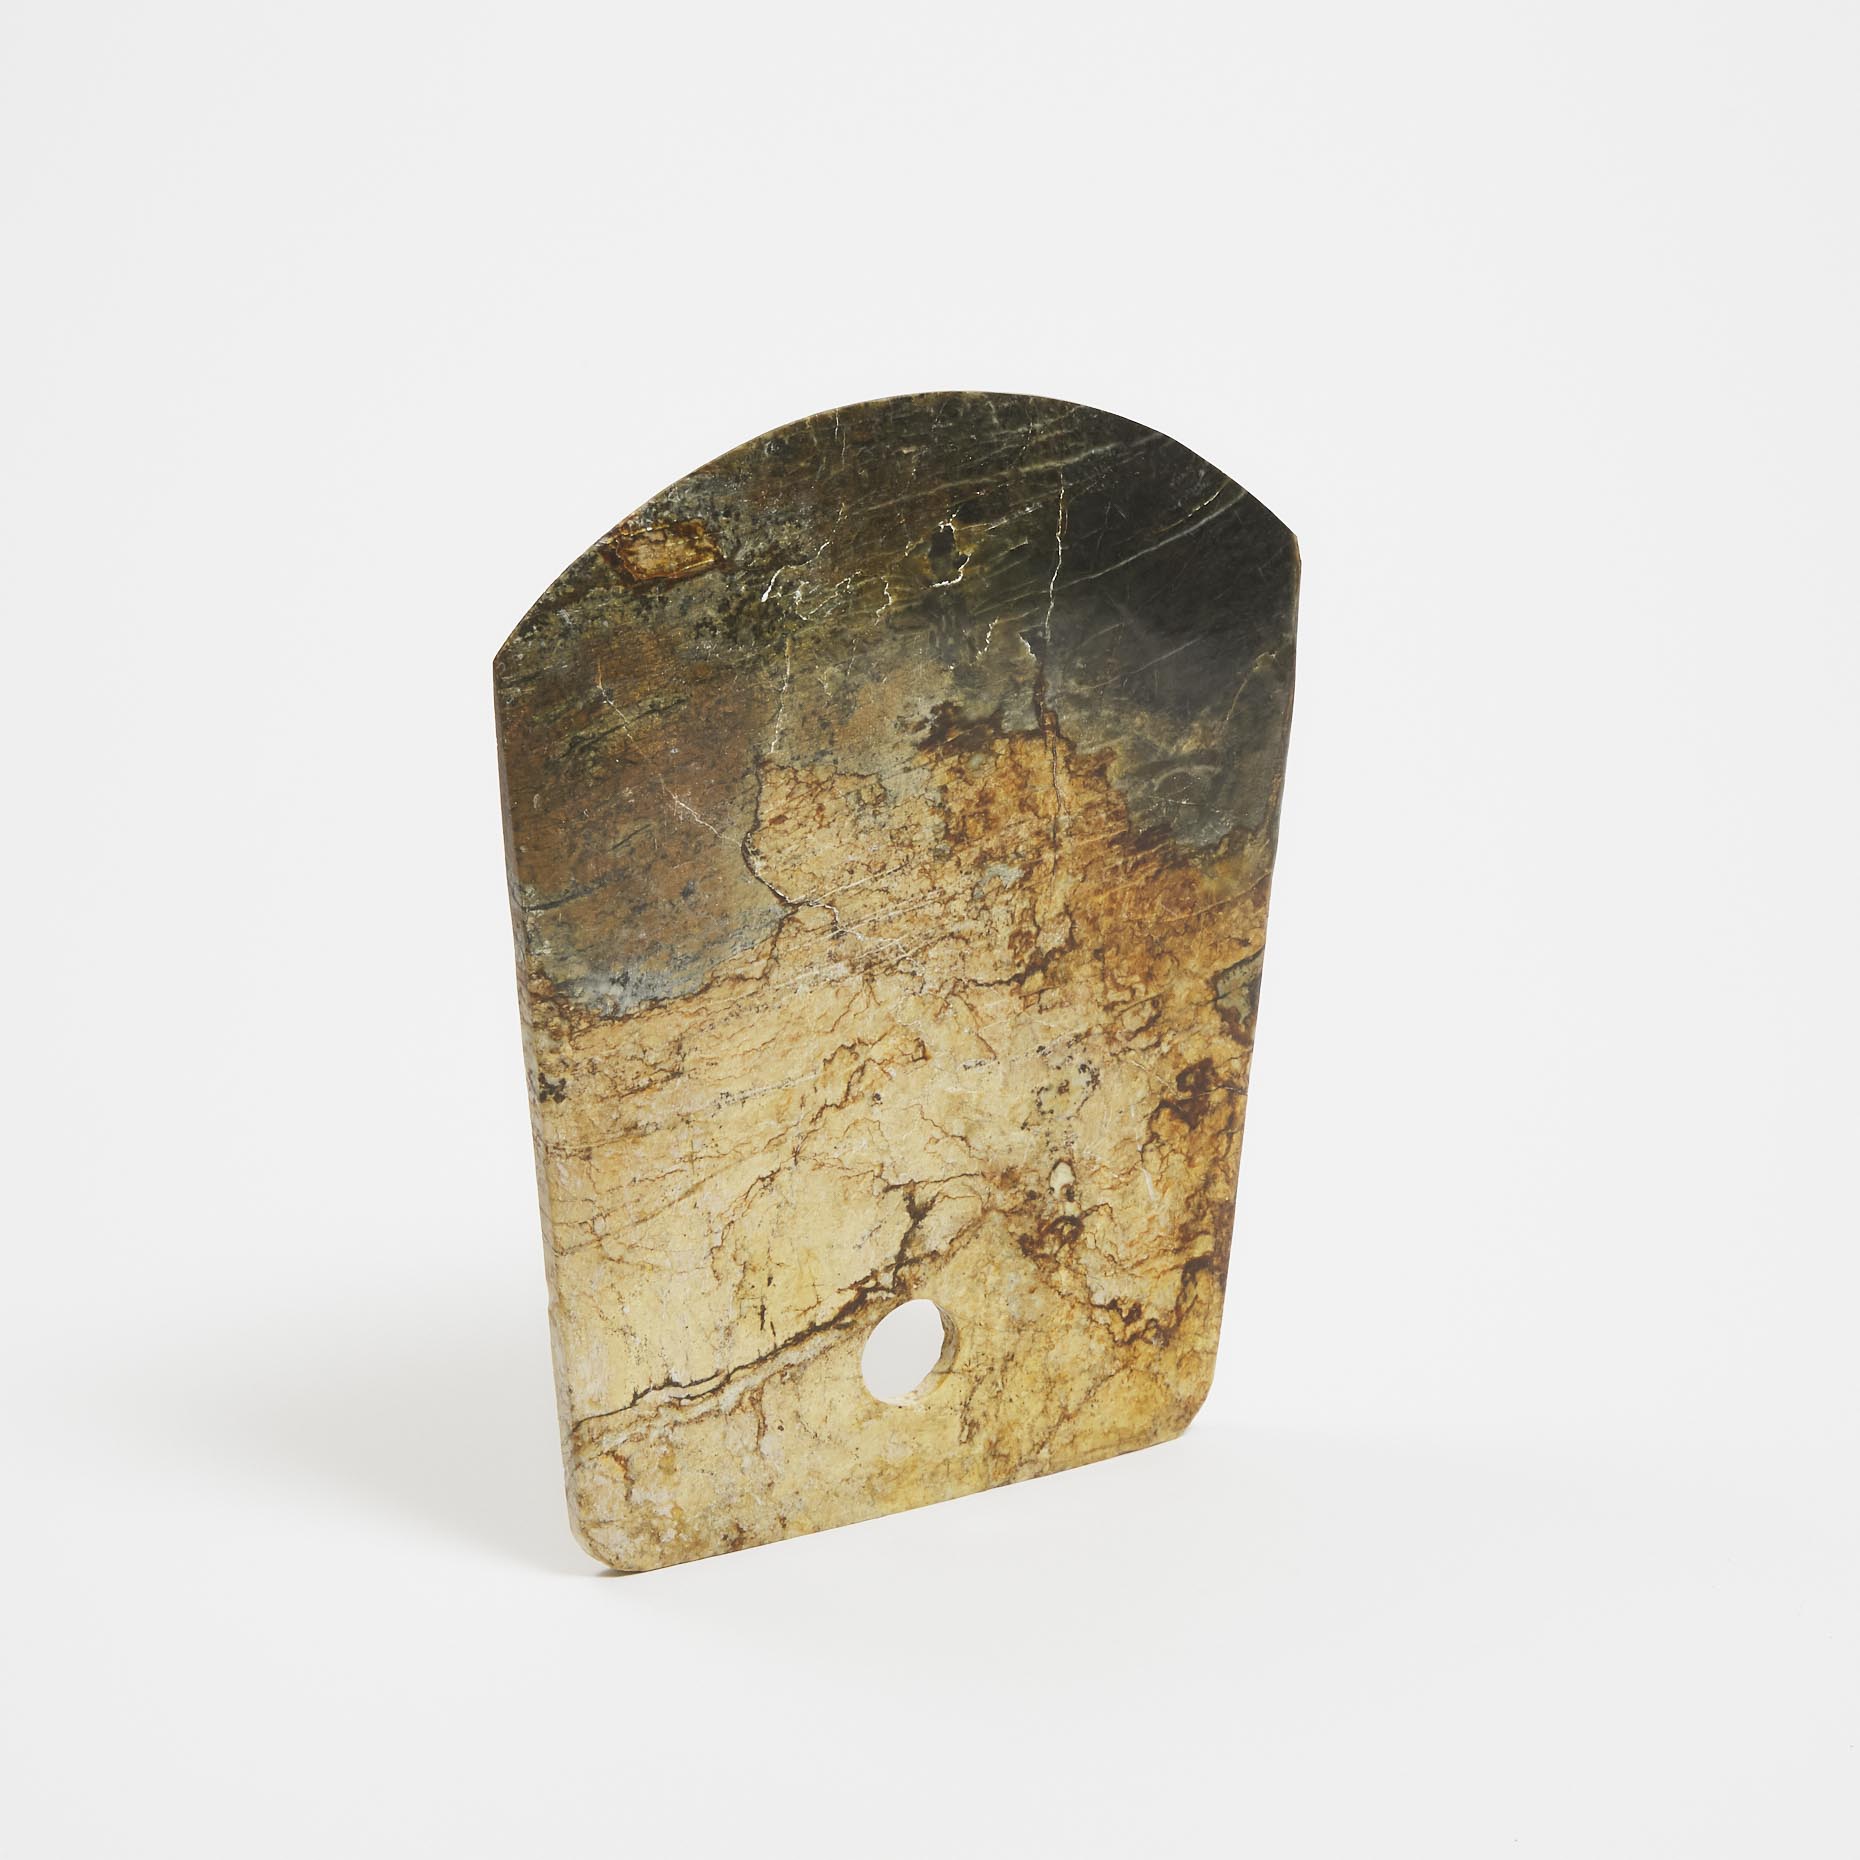 A Liangzhu Neolithic-Style Hardstone Axe